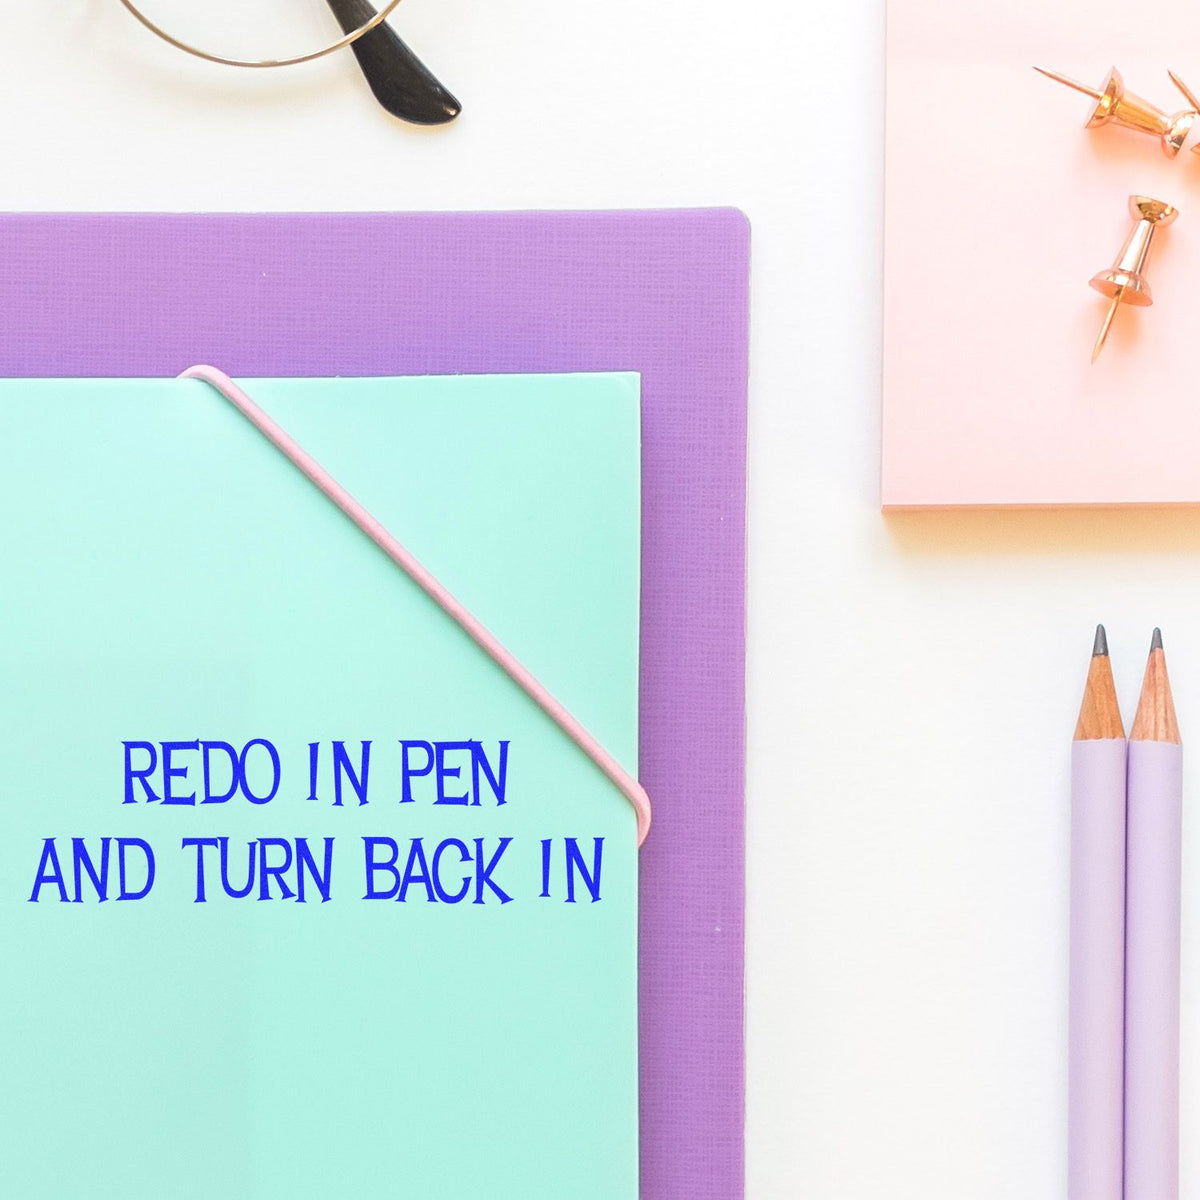 Large Redo In Pen And Turn Back In Teacher Rubber Stamp In Use Photo